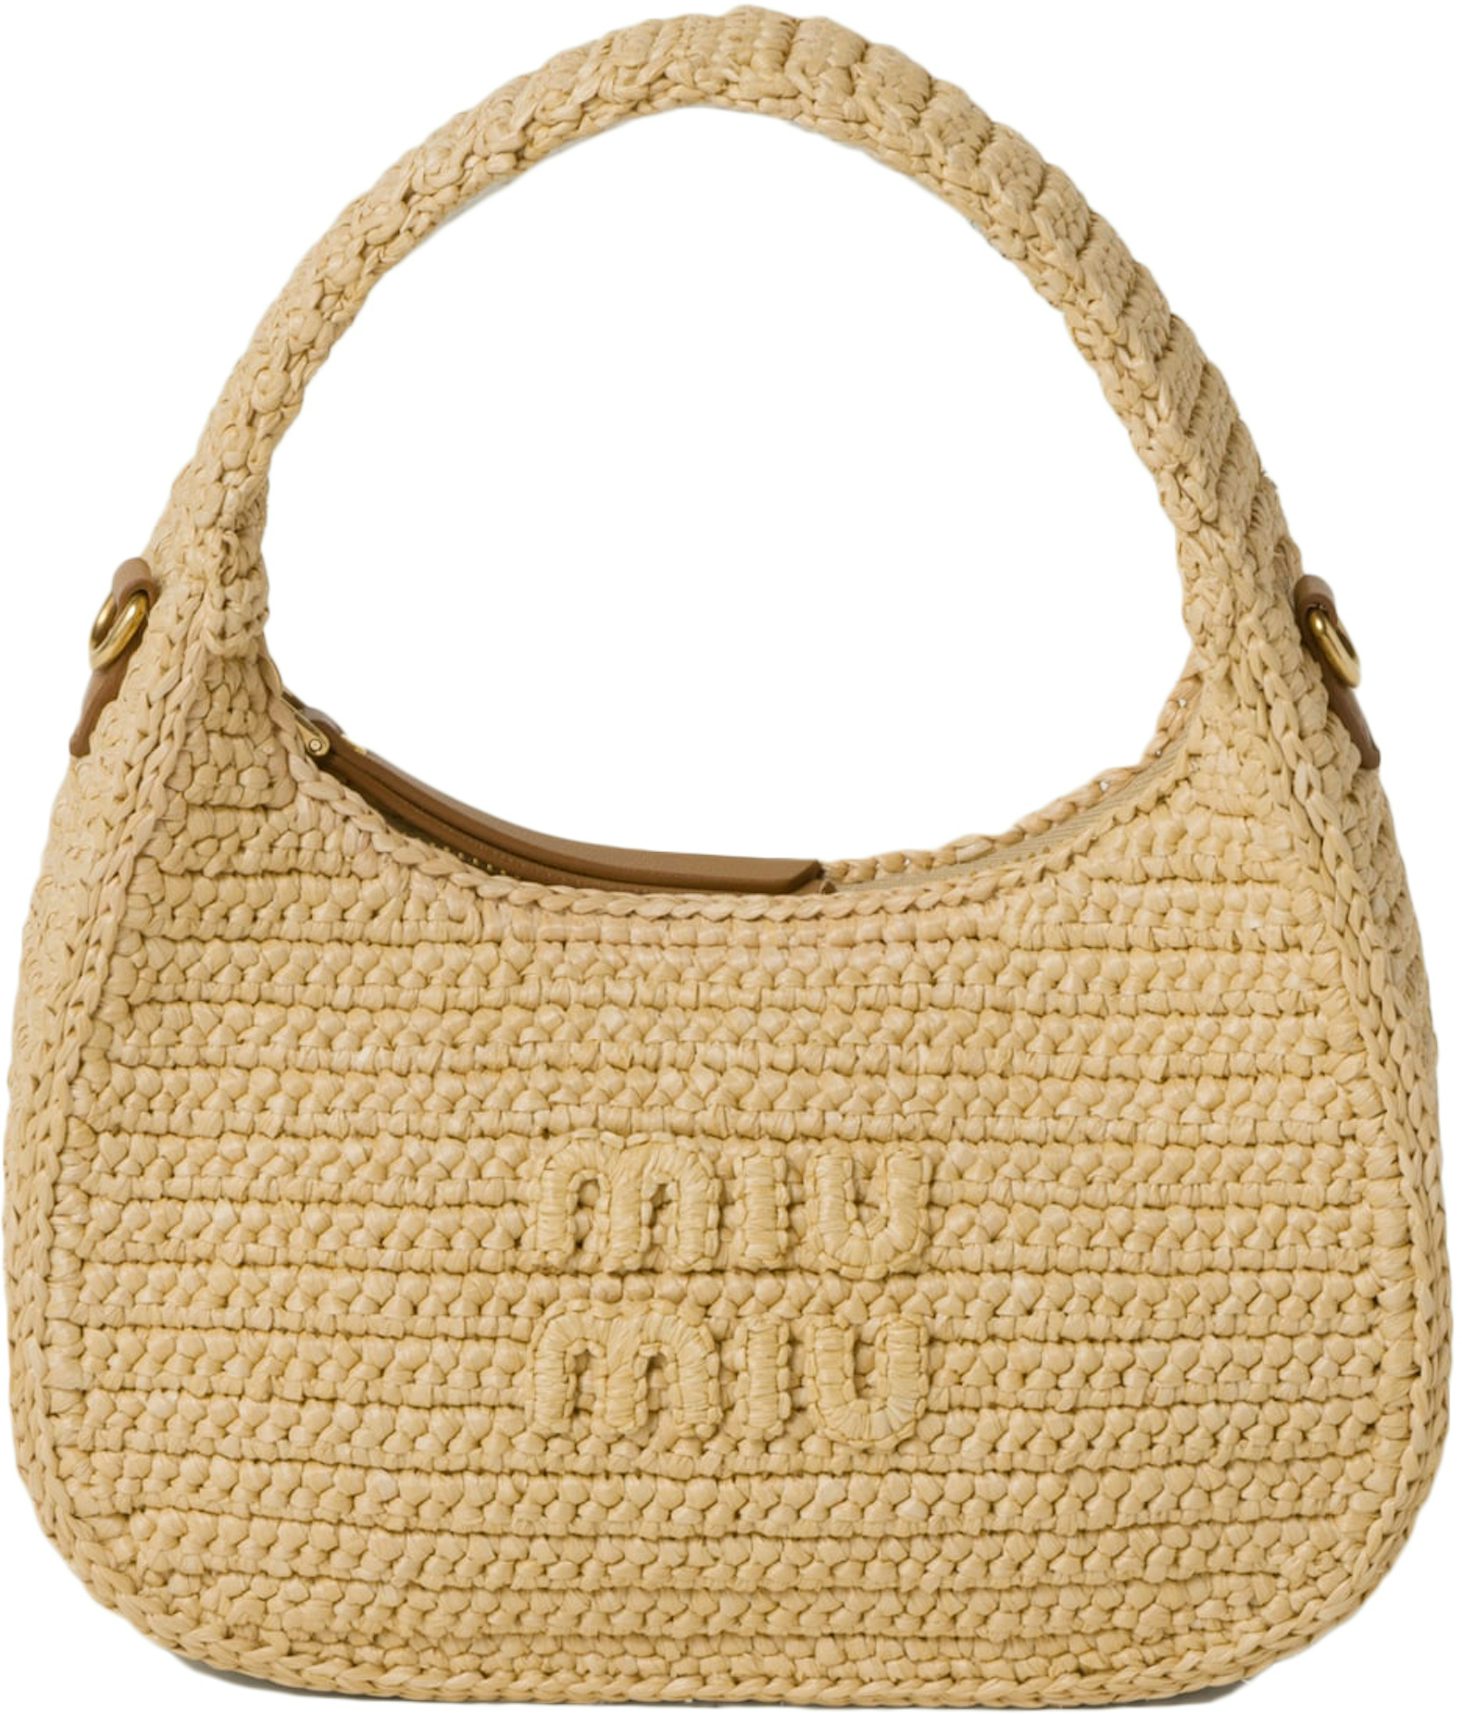 Jacquemus Le Chiquito Noeud Coiled Handbag Green in Leather with Gold-tone  - US